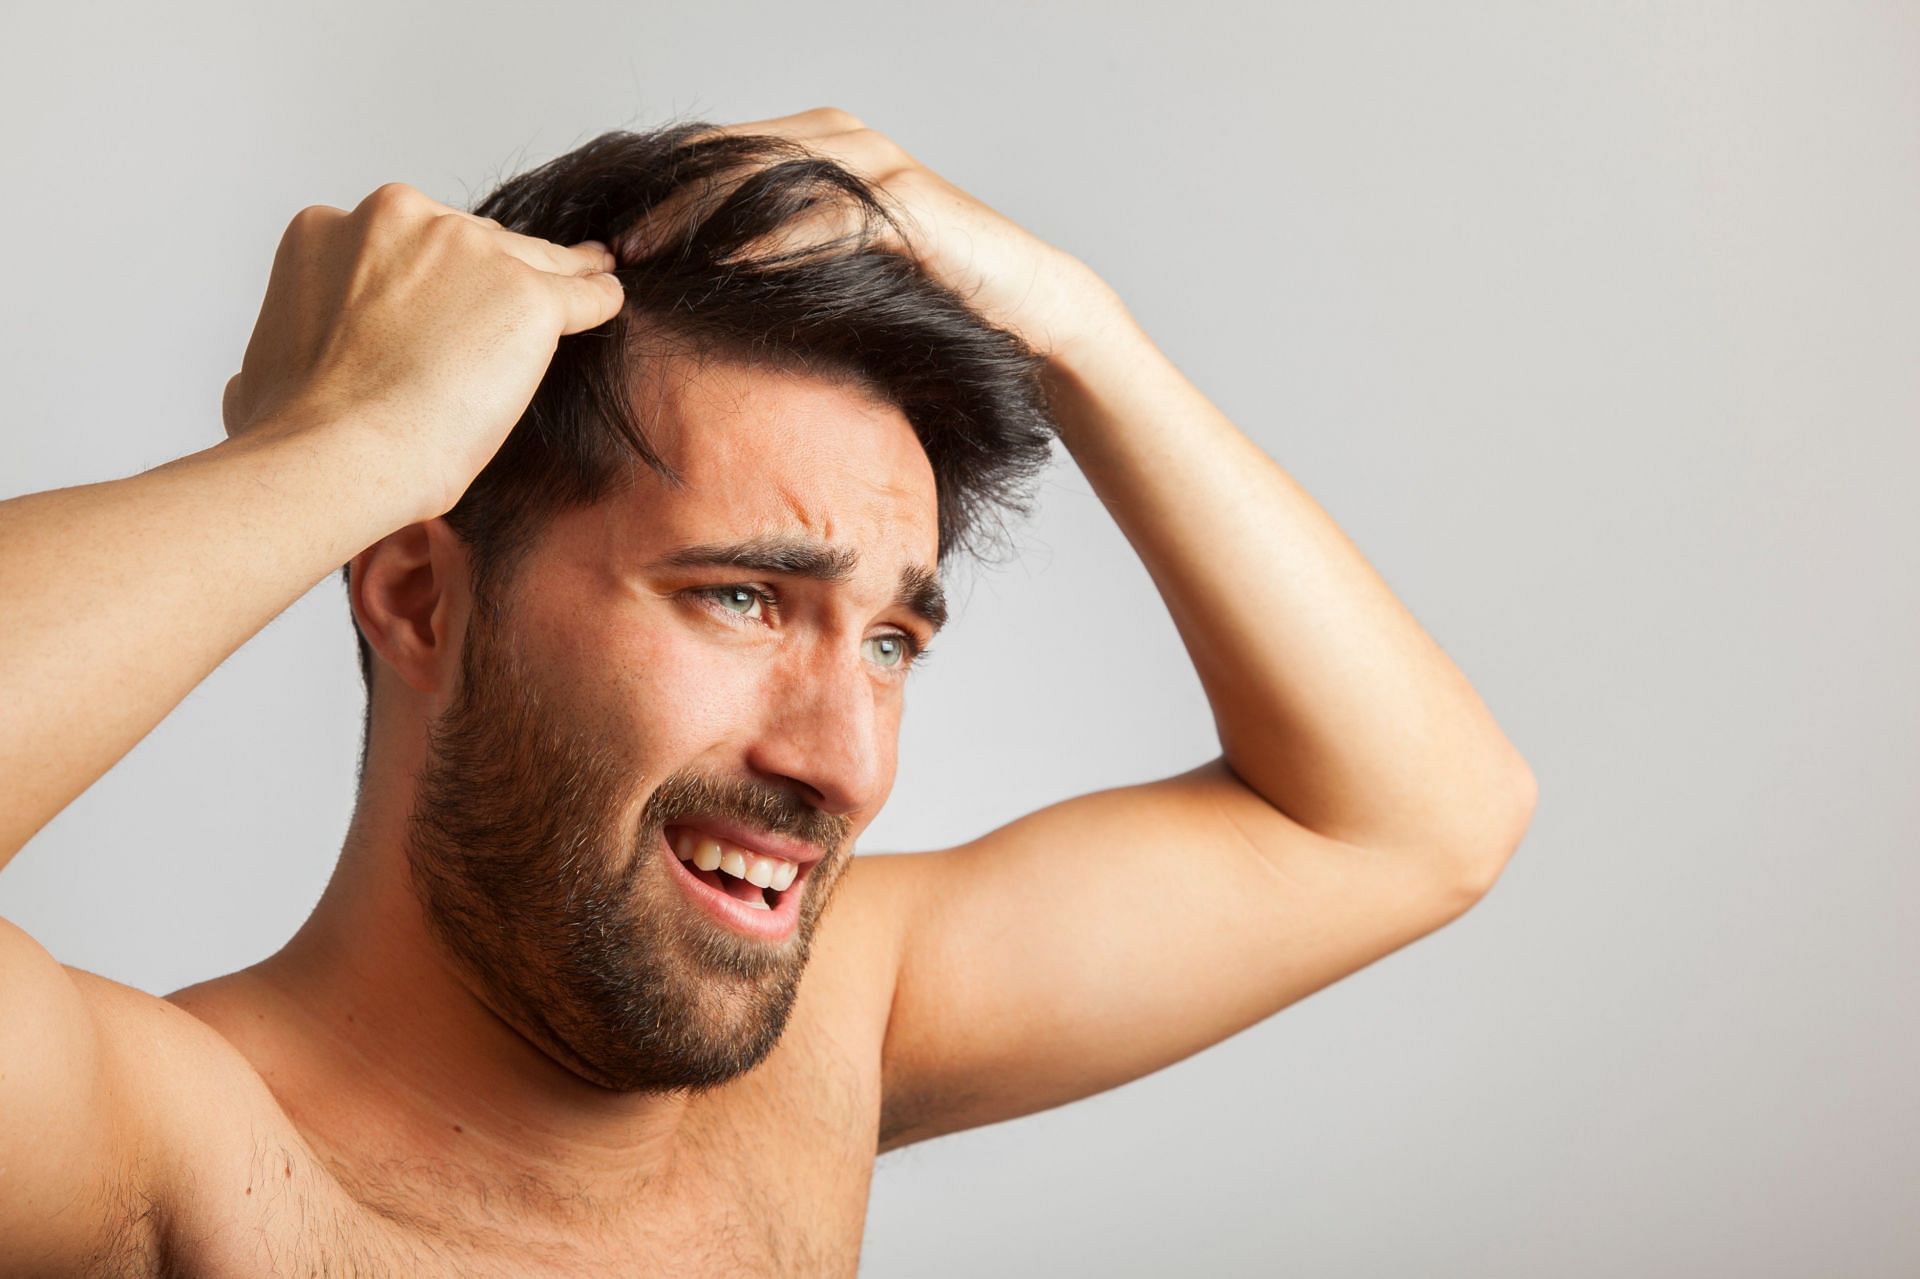 Treatment for scalp eczema is widely available and if severe, needs immediate attention. (Image via Freepik/ Freepik)